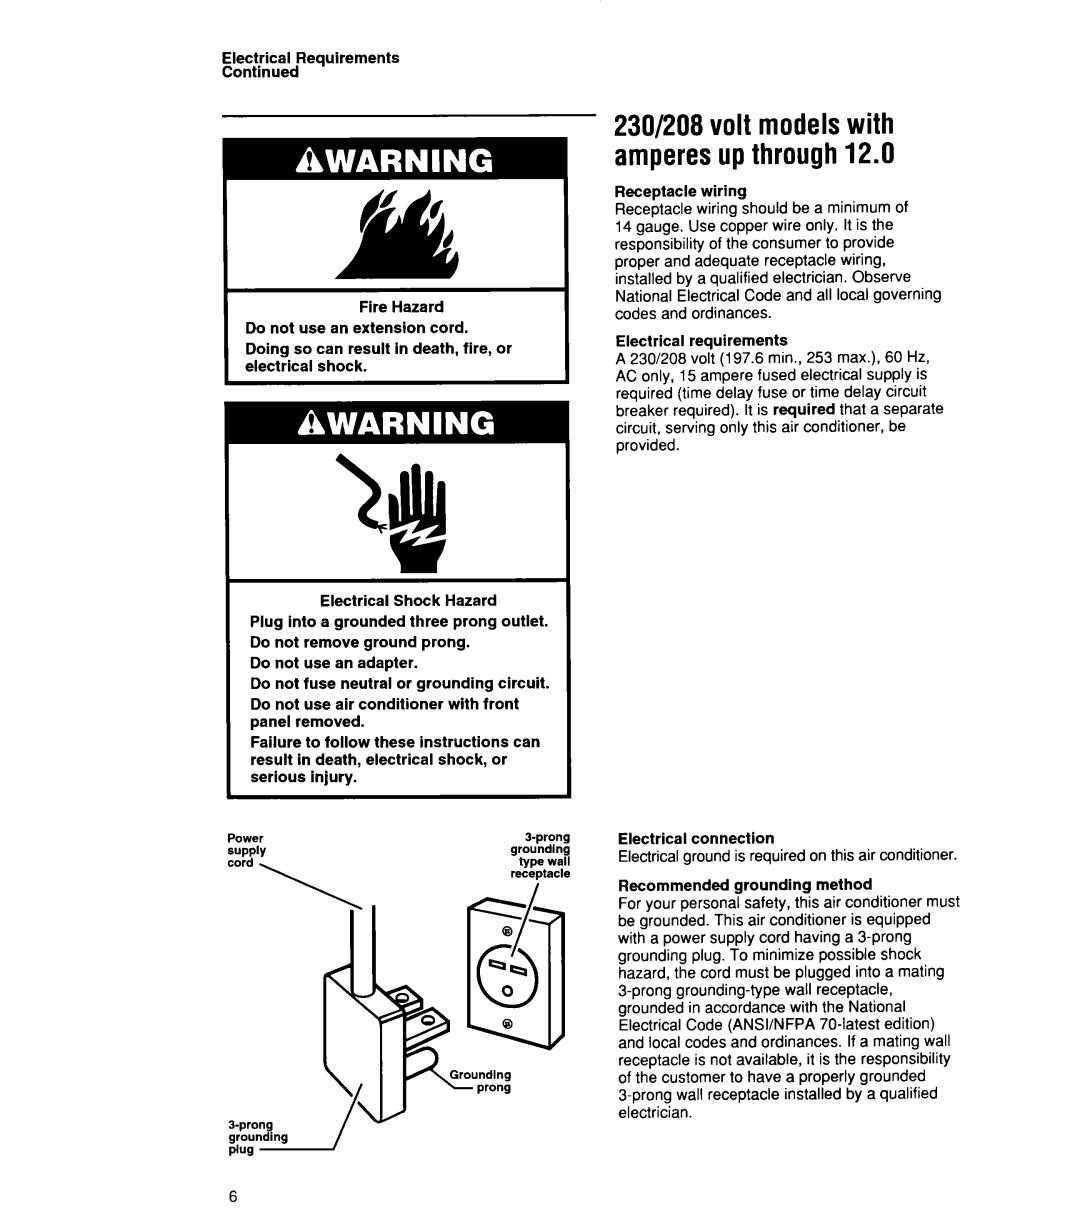 Whirlpool ACU072XE installation instructions 230/208volt modelswith amperesupthrough12.0 